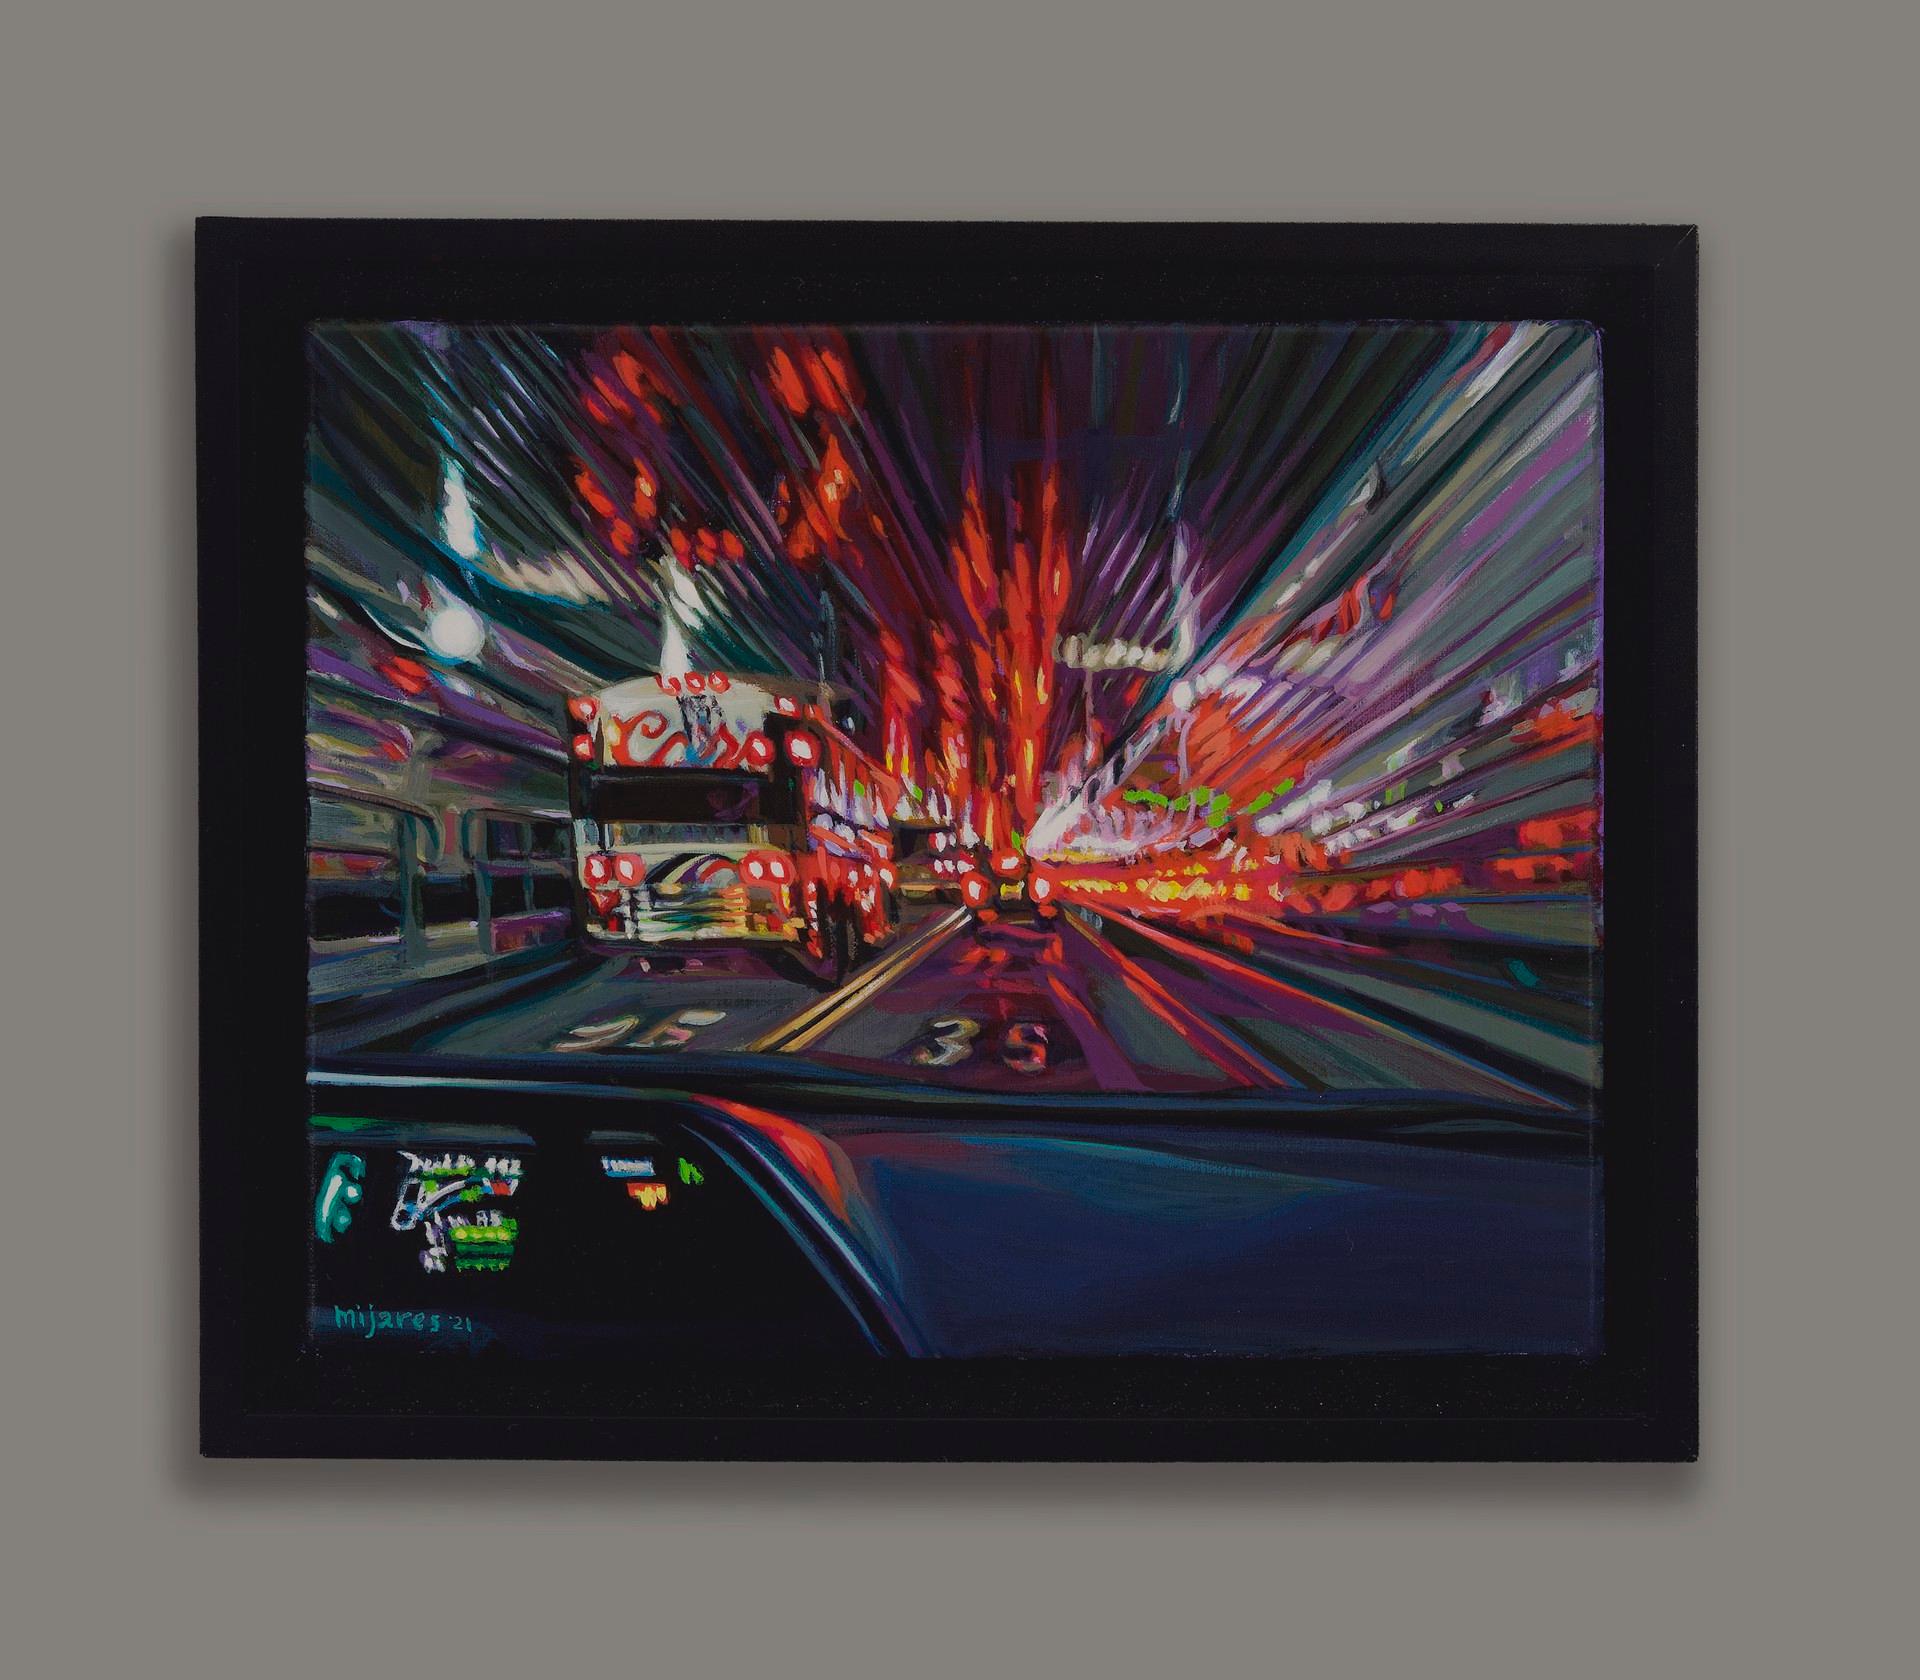 Lincoln Tunnel (Dash) - Painting by Maria Mijares